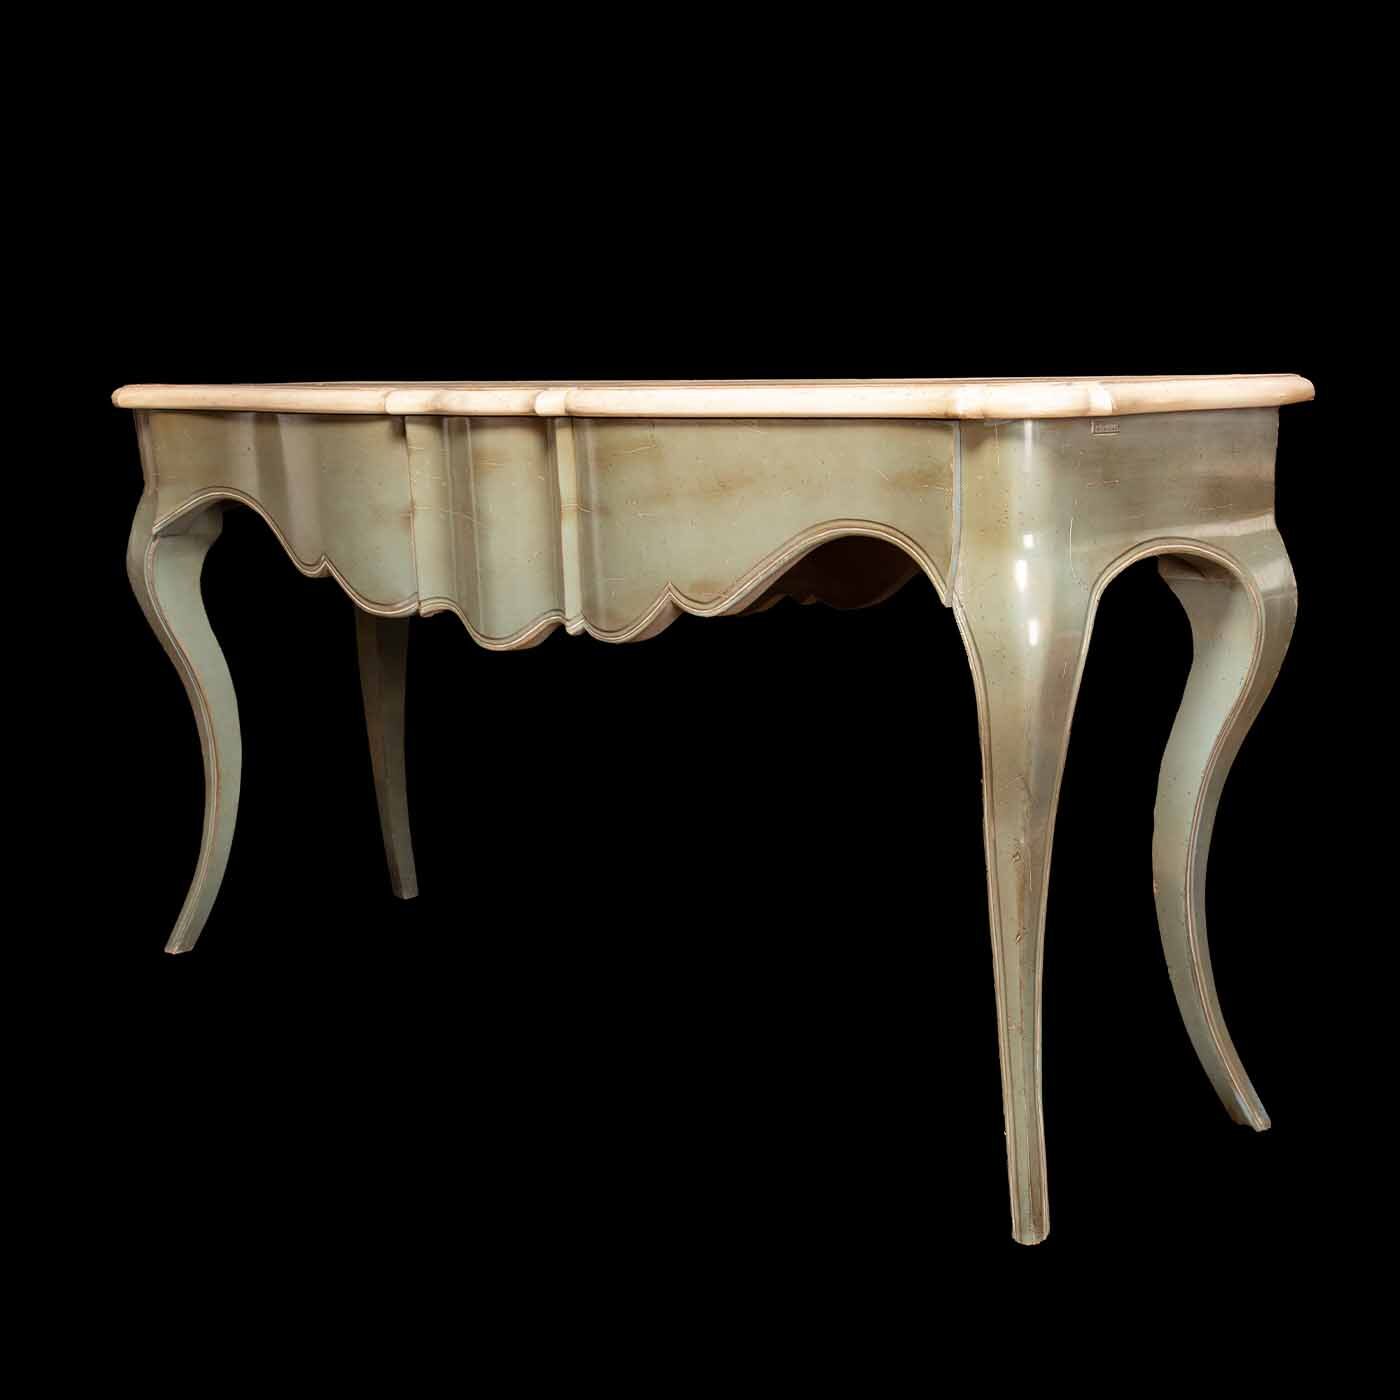 French Provincial Style Console